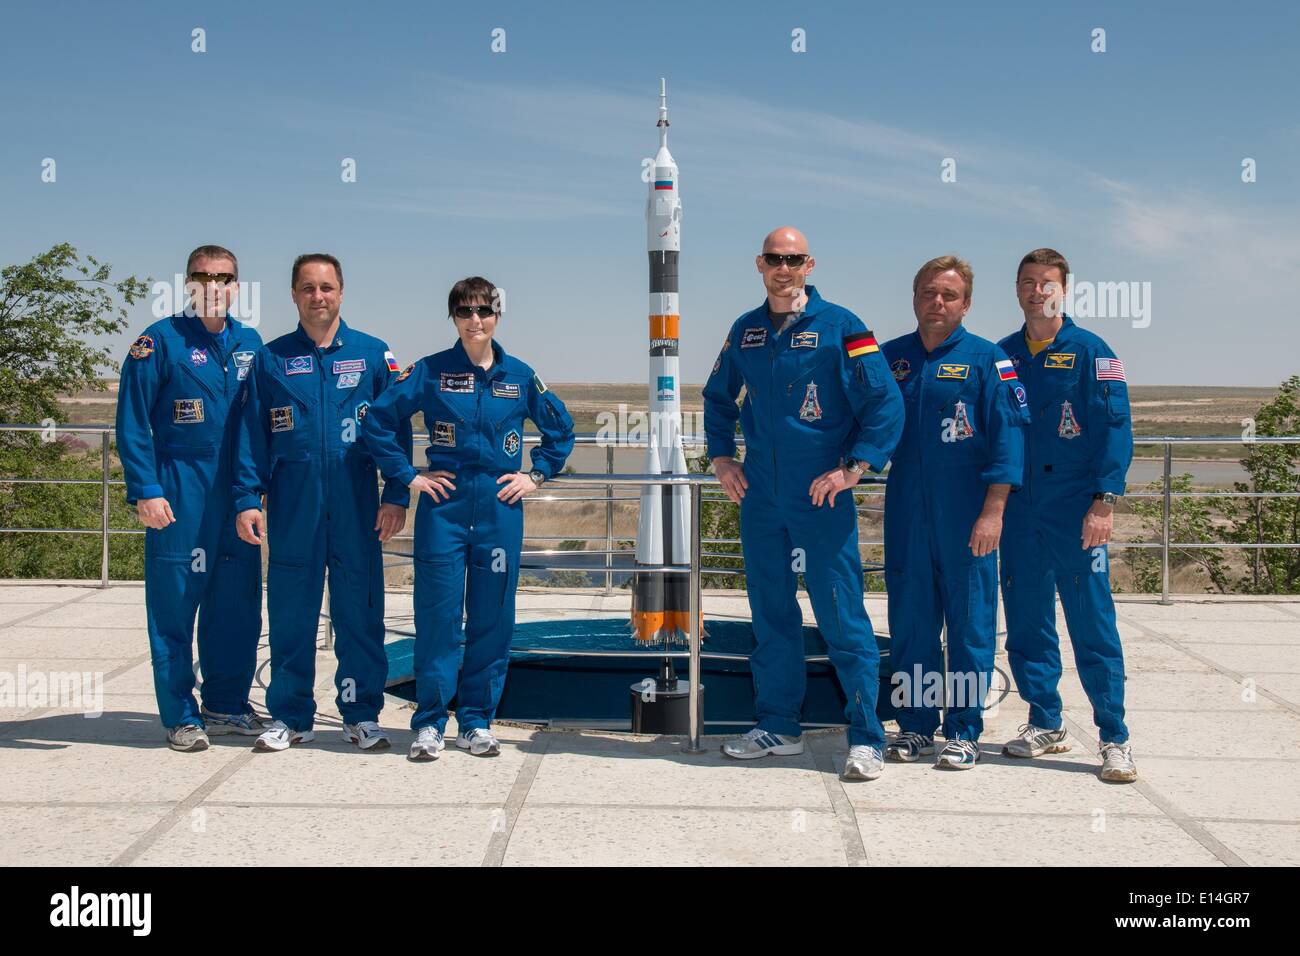 ISS Expedition 41 backup and prime crews pose for photos as part of their traditional pre-launch training ceremonies May 21, 2014 in Baikonur, Kazakhstan. From left to right are backup crew members Terry Virts of NASA, Anton Shkaplerov of the Russian Federal Space Agency and Flight Engineer Samantha Cristoforetti of the European Space Agency and prime crew members Alexander Gerst of the European Space Agency , Soyuz Commander Max Suraev of Roscosmos and Flight Engineer Reid Wiseman of NASA. The crew will launch on May 29 in the Soyuz TMA-13M spacecraft from Baikonur for a 5 ½ month mission on Stock Photo